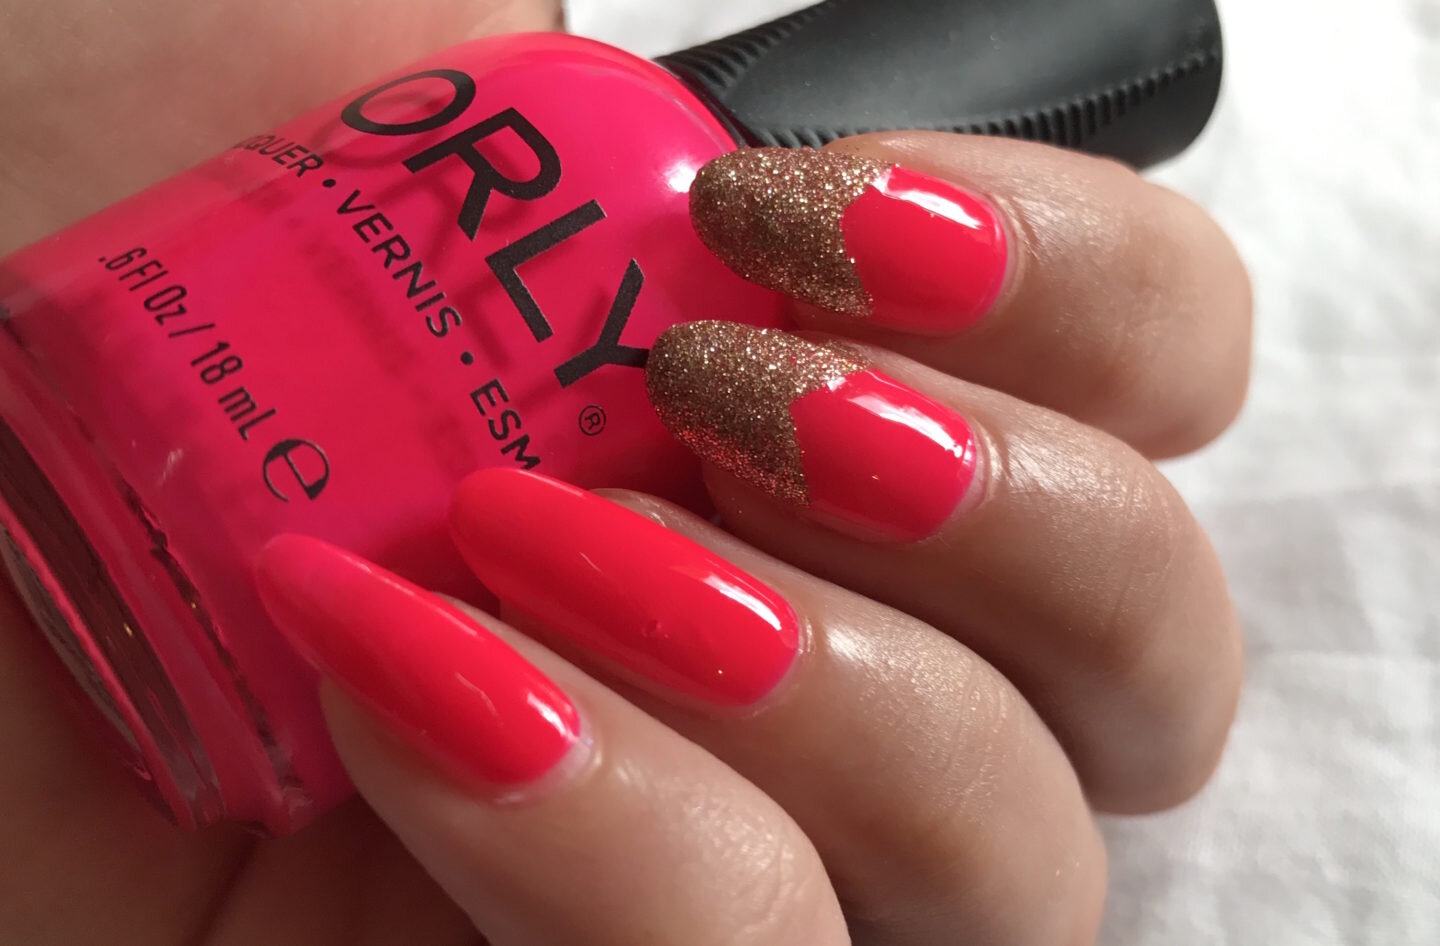 Orly No Regrets